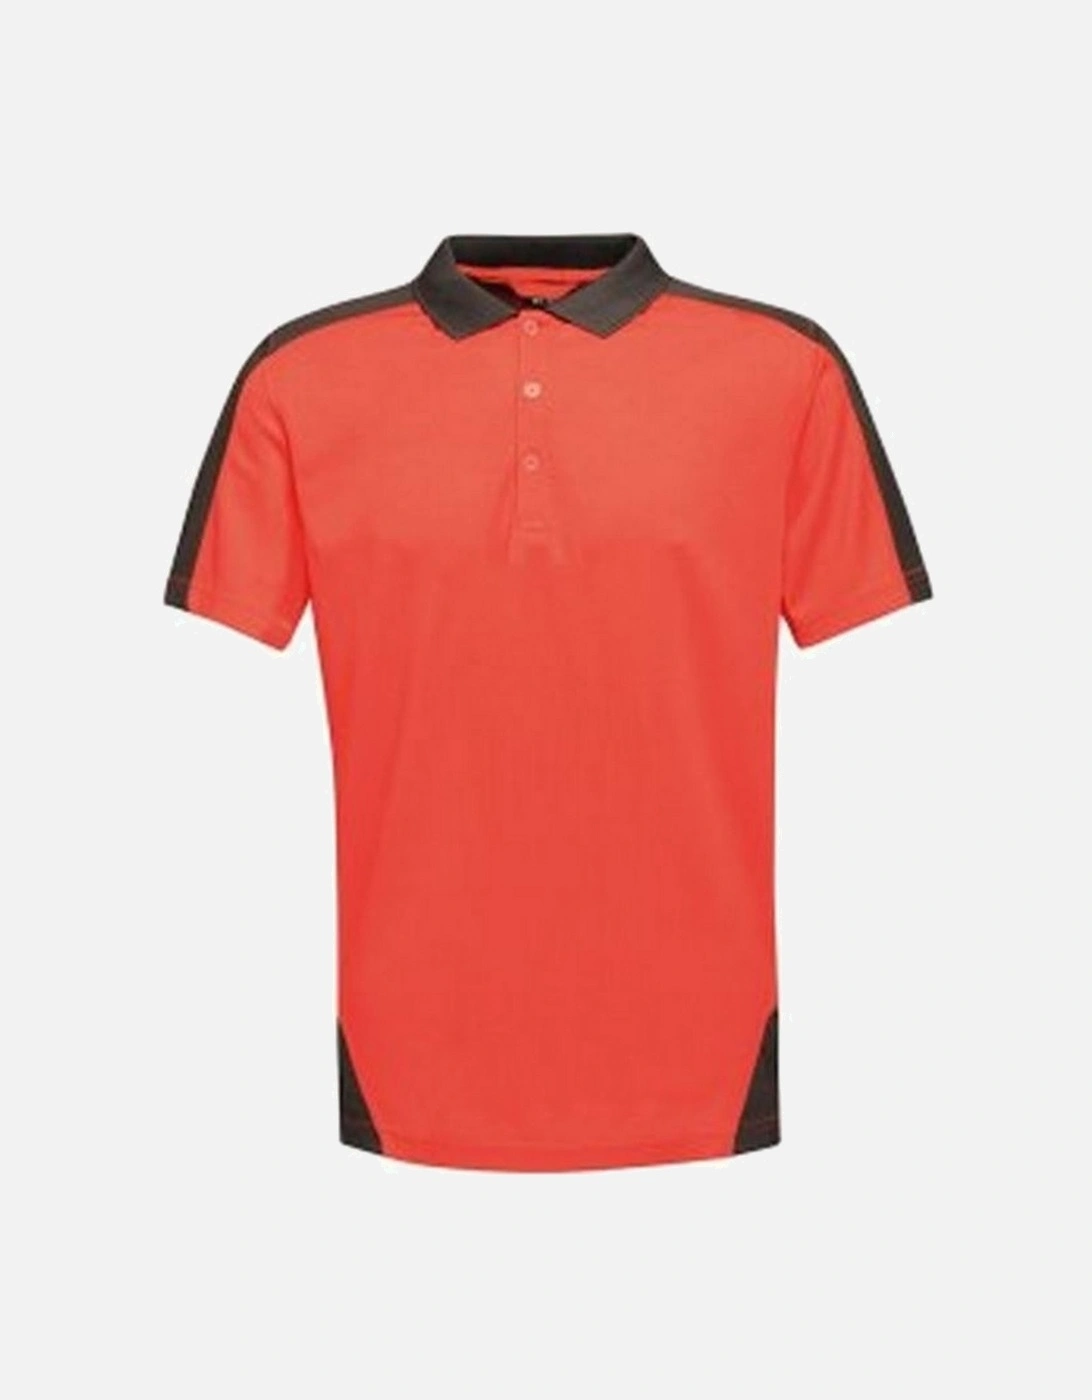 Contrast Coolweave Pique Polo Shirt